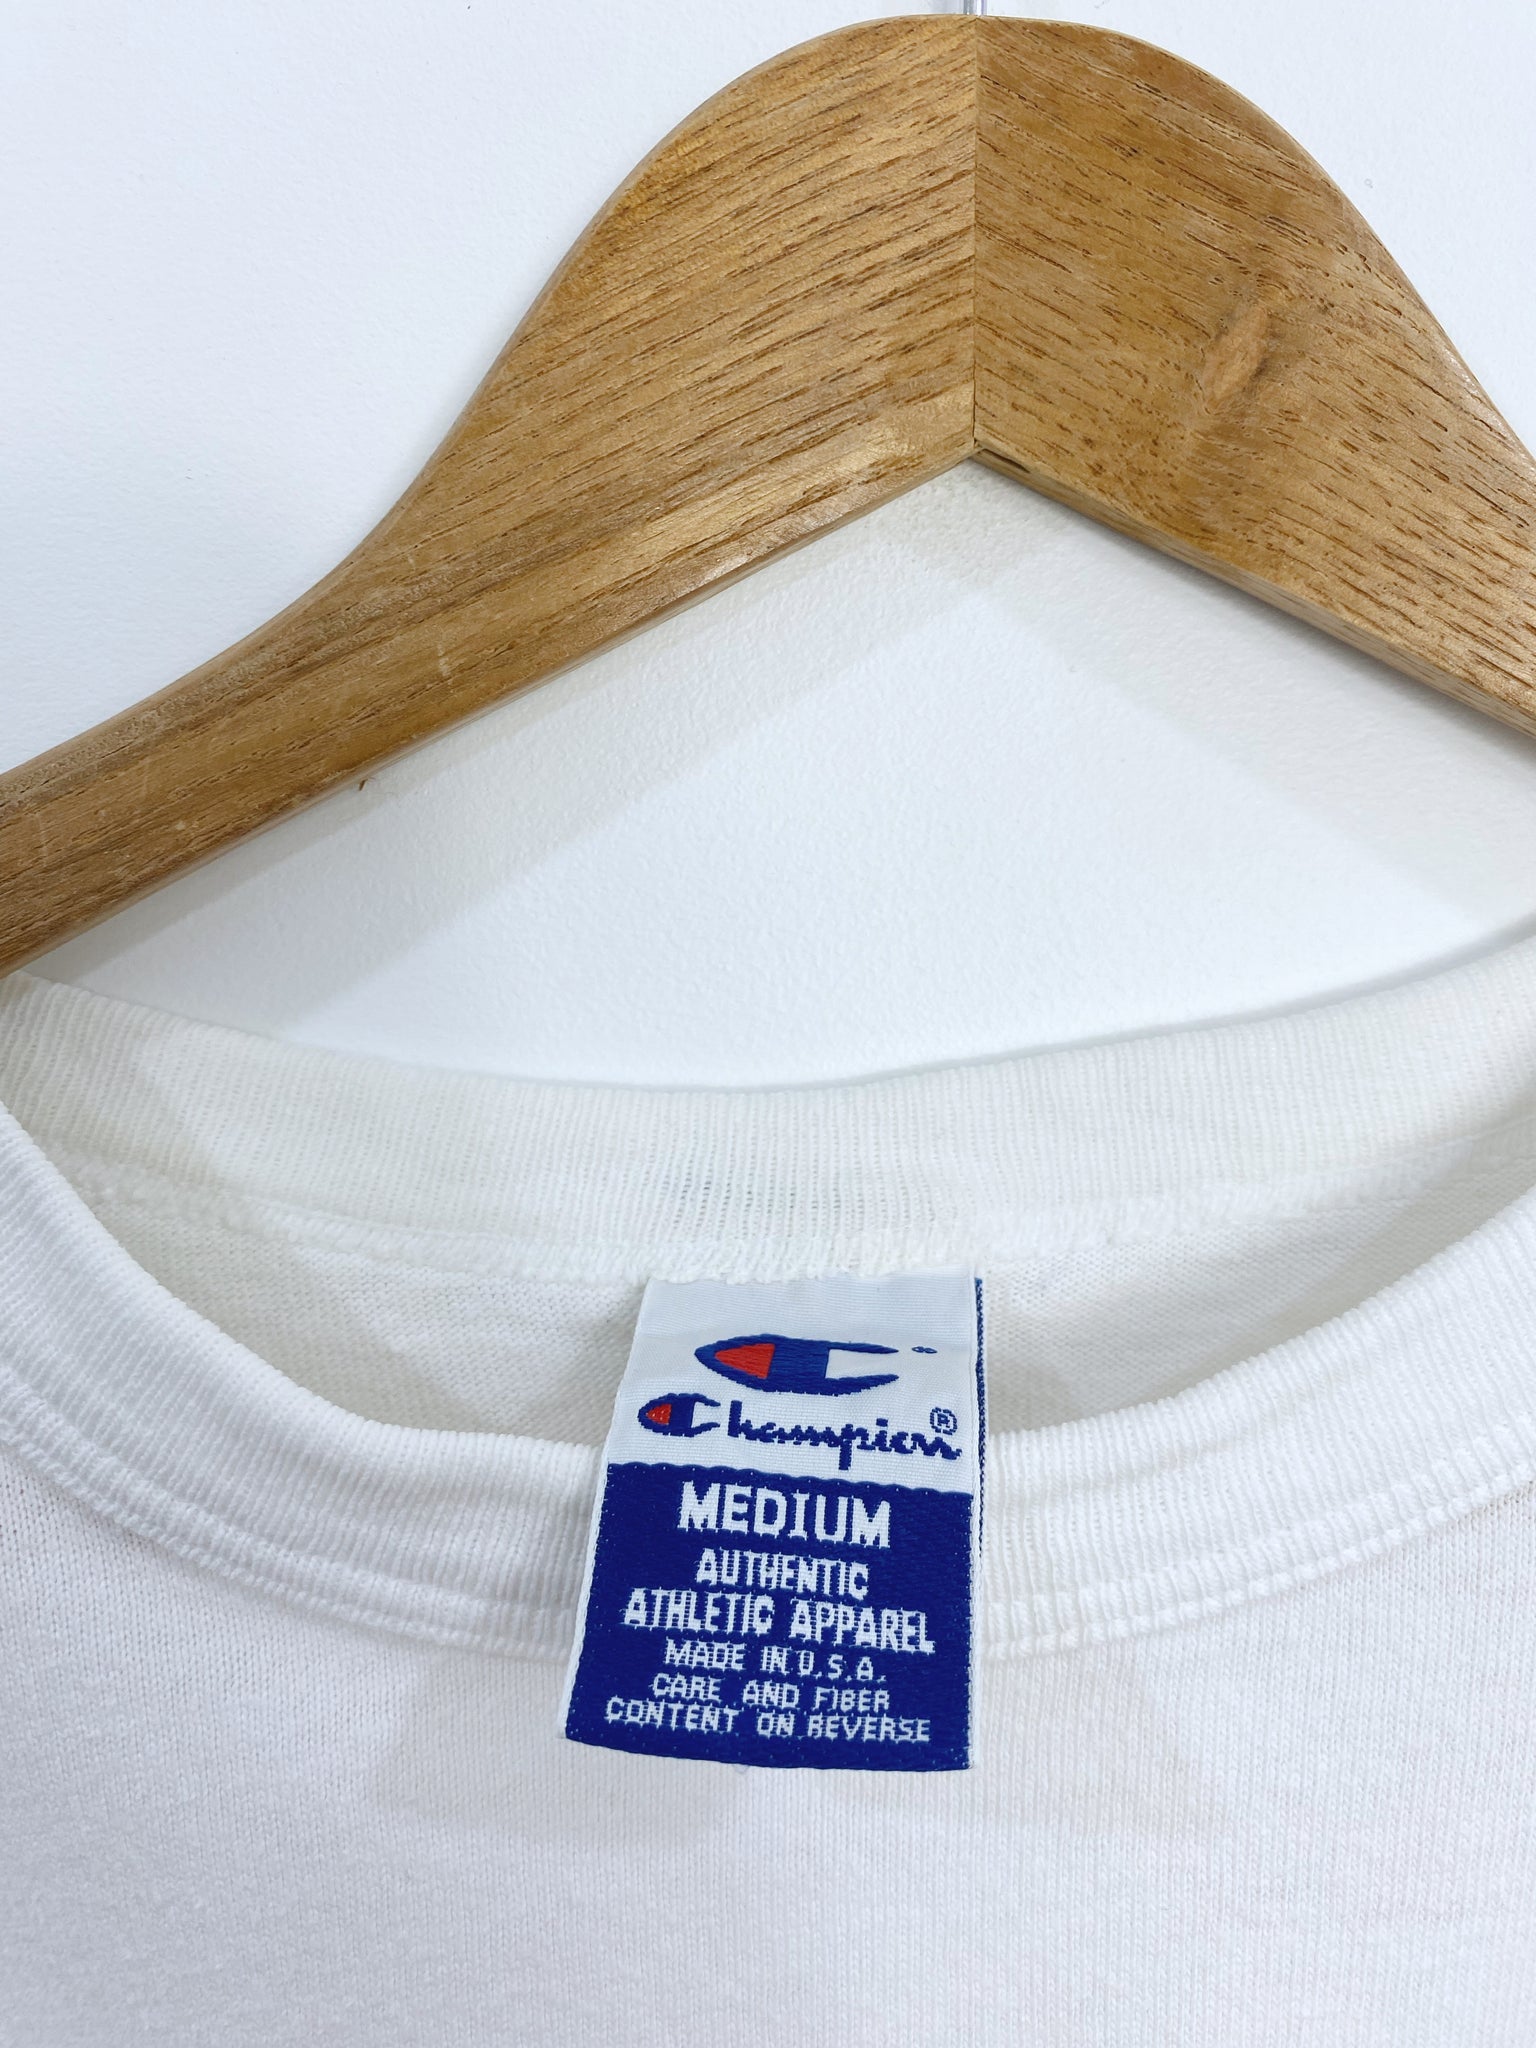 Vintage 90s Champion Embroidered T-shirt M